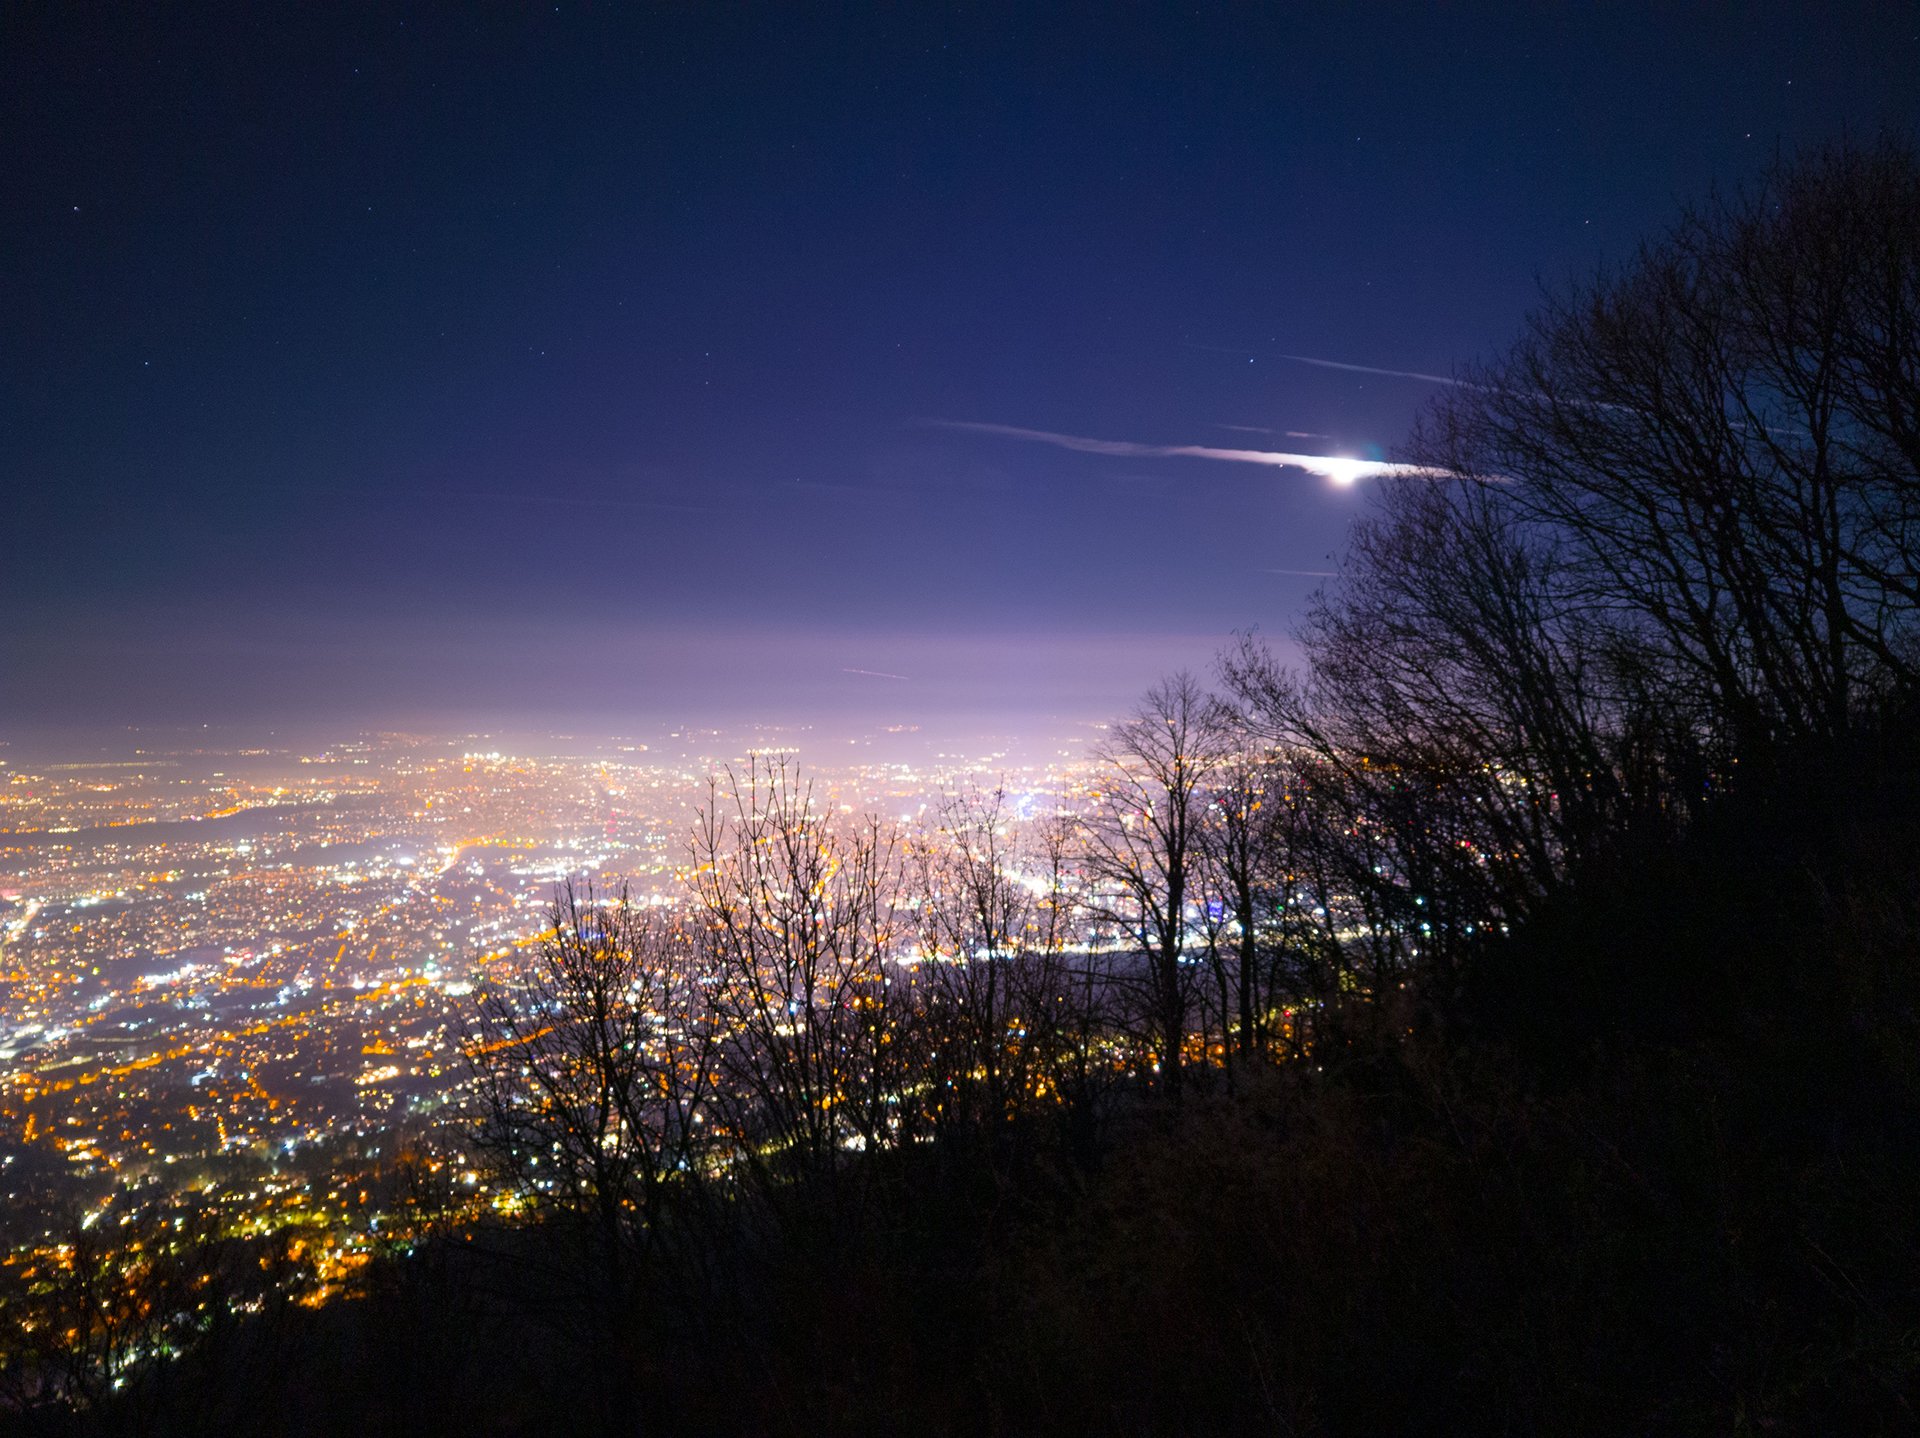 Mikhail Minkov photographed "Mega Moments: Night above the city" with the Xiaomi 12T Pro